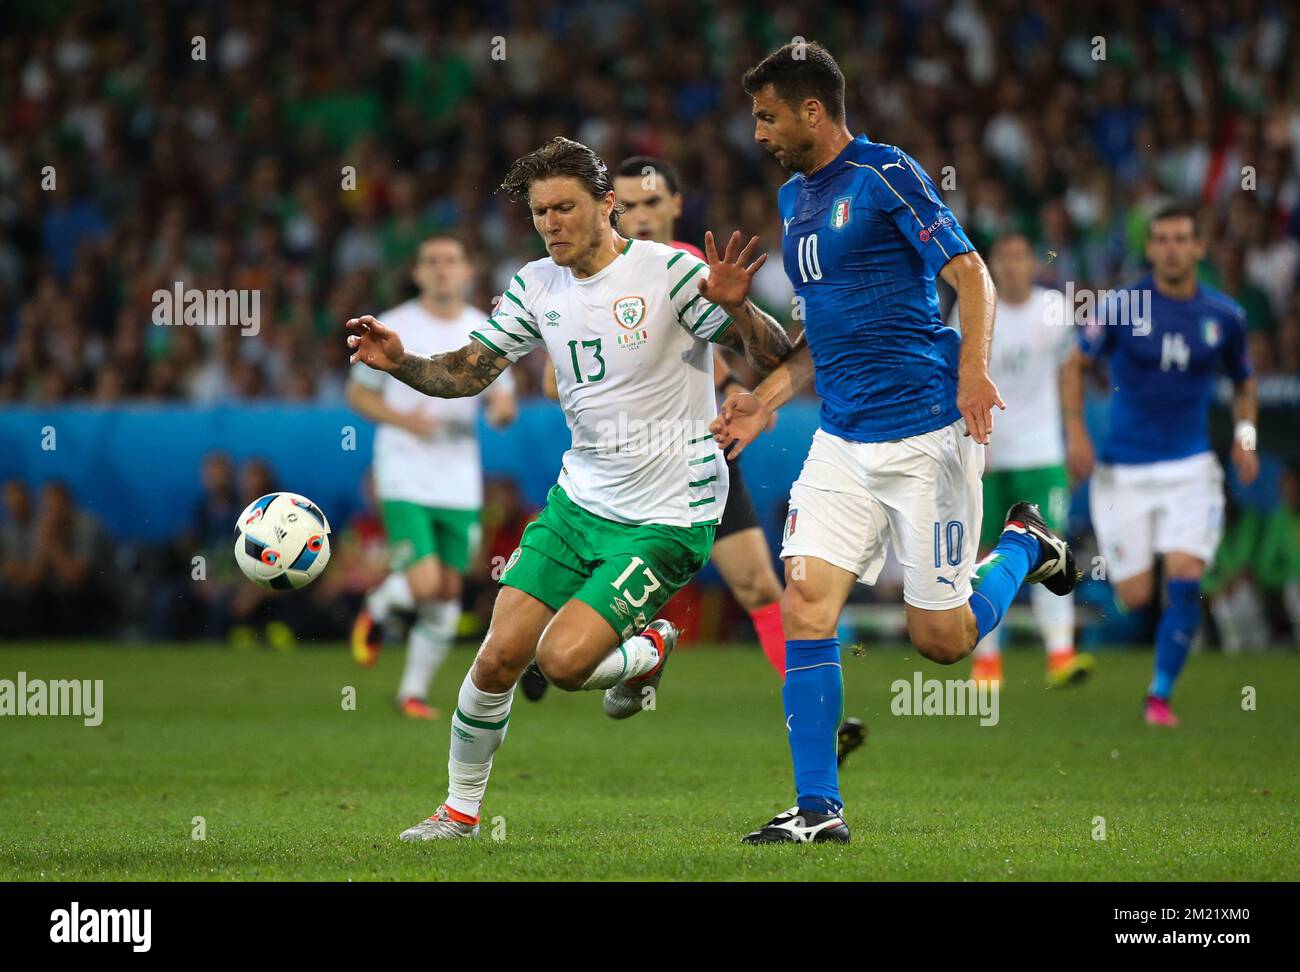 Ireland's Jeff Hendrick and Italy's Thiago Motta fight for the ball during a soccer game between Ireland and Italy, in group E of the group stage of the UEFA Euro 2016 European Championships, Wednesday 22 June 2016 in Villeneuve-d'Ascq, France.  Stock Photo